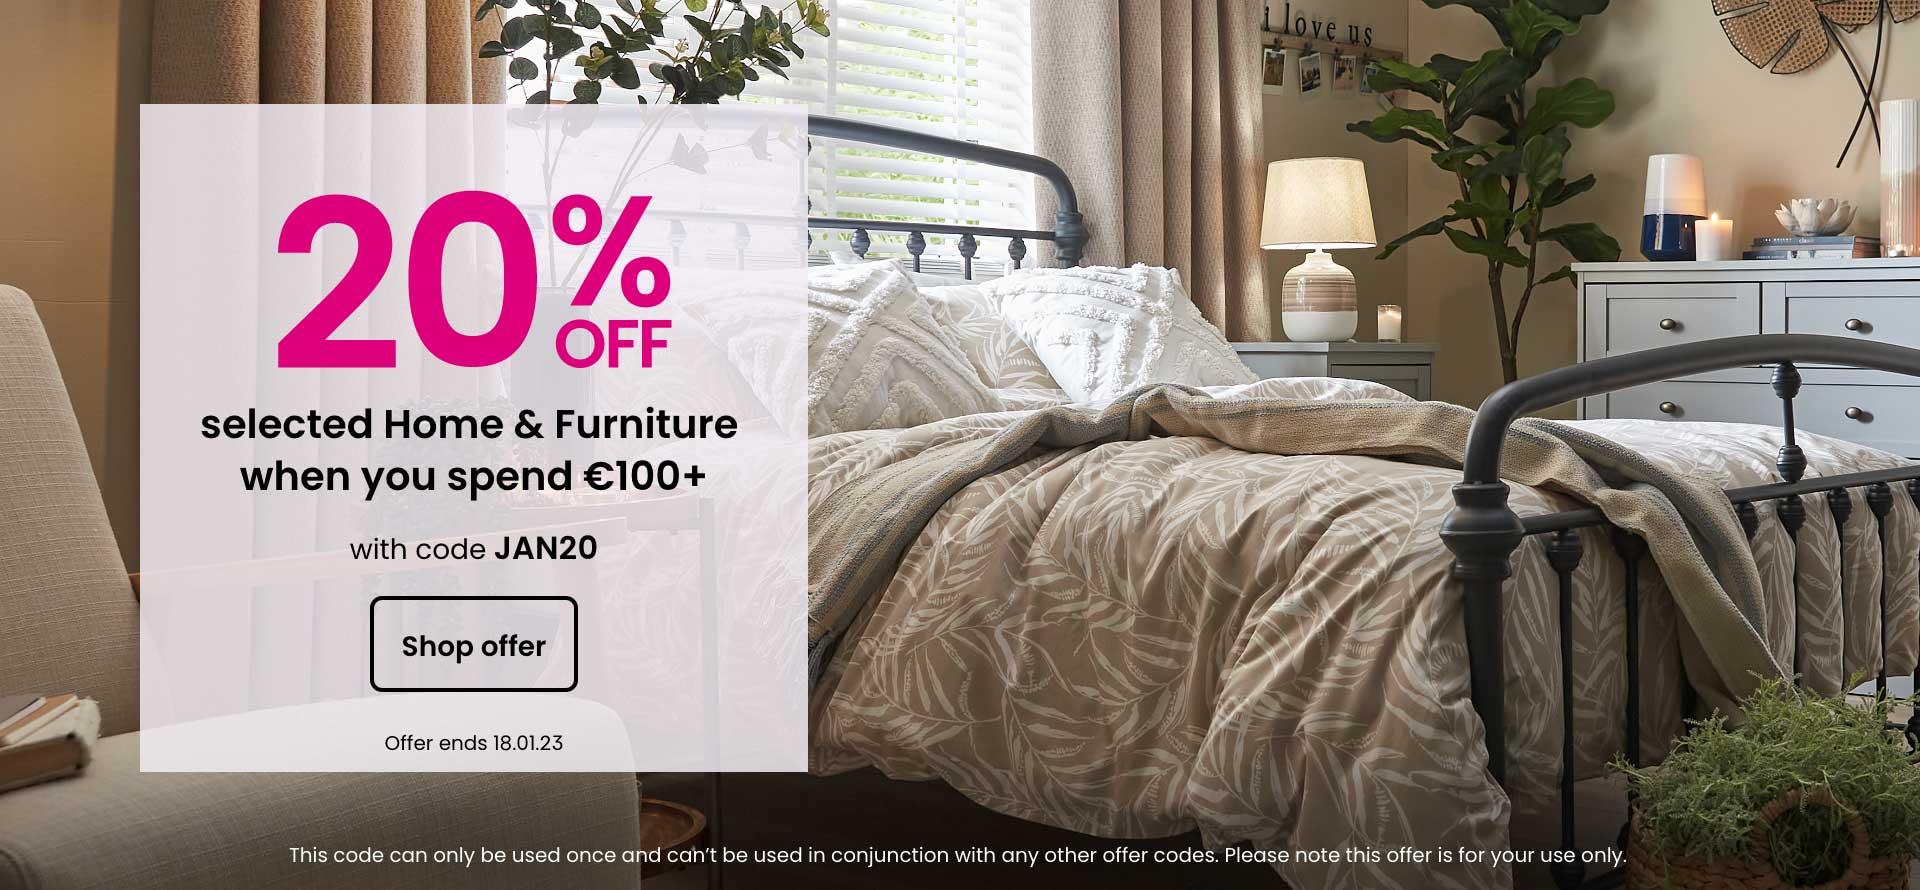 20% off selected home & furniture when you spend £100 or more with code JAN20. Shop now. Offer ends 18.01.23.